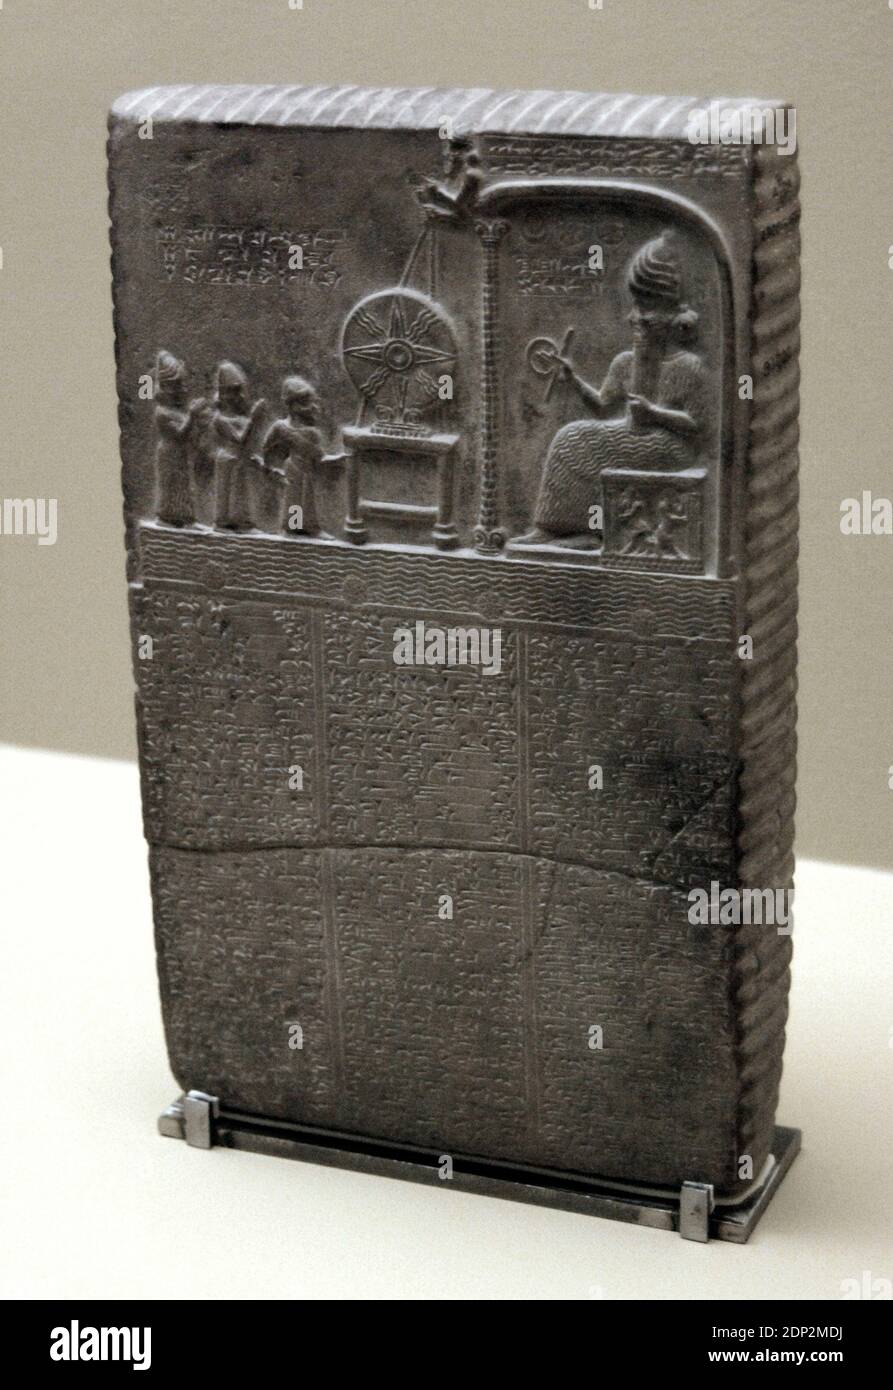 The Sun God Tablet. Limestone. The scene carved in the relief represents Nabu-aplu-iddina being led by the priest Nabu-nadin-shum and the goddess Aa into the presence of the Sun-god, woh is seated within Ebabbara. Before the god is the solar disc. Middle Babylonian. Neo-Babylonian Dynasty. 860 BC-850 BC. Sippar, Iraq, Middle East. British Museum. London, England, United Kingdom. Stock Photo